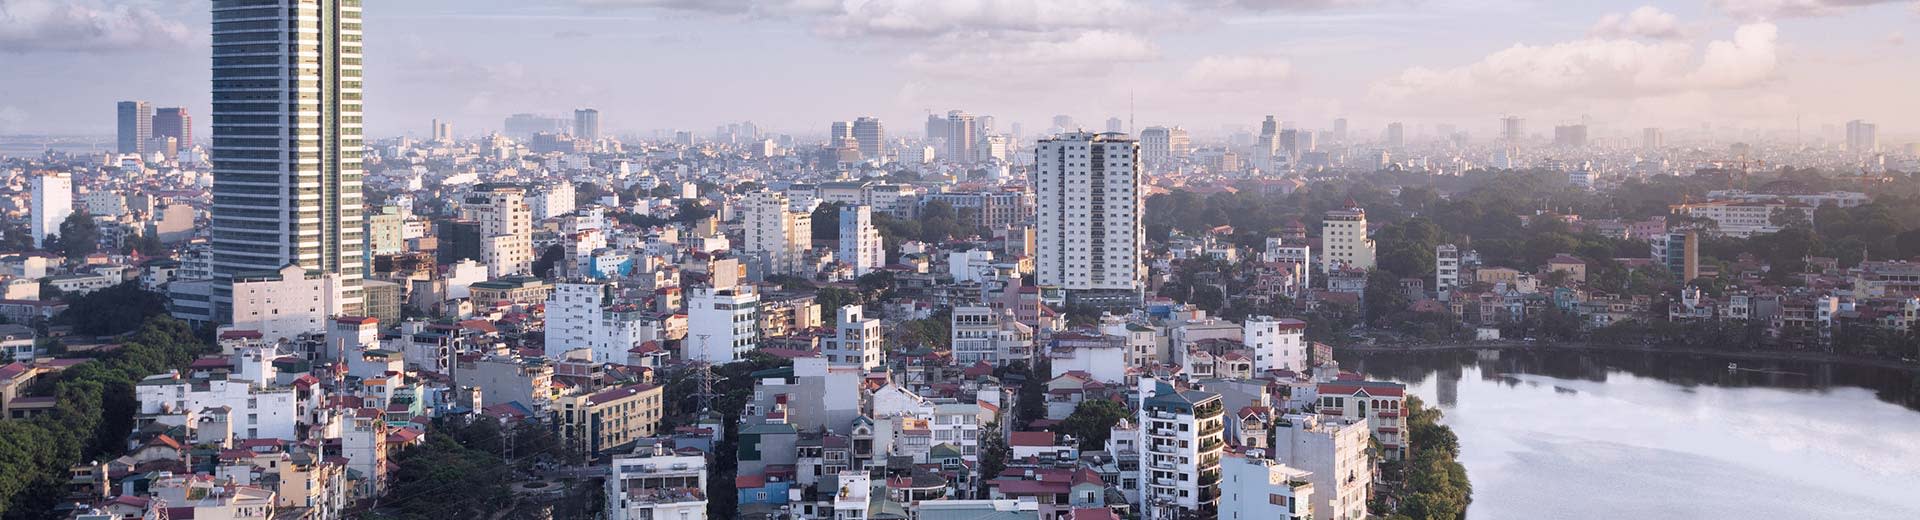 The varied and interesting cityscape of Hanoi in the early morning sun.